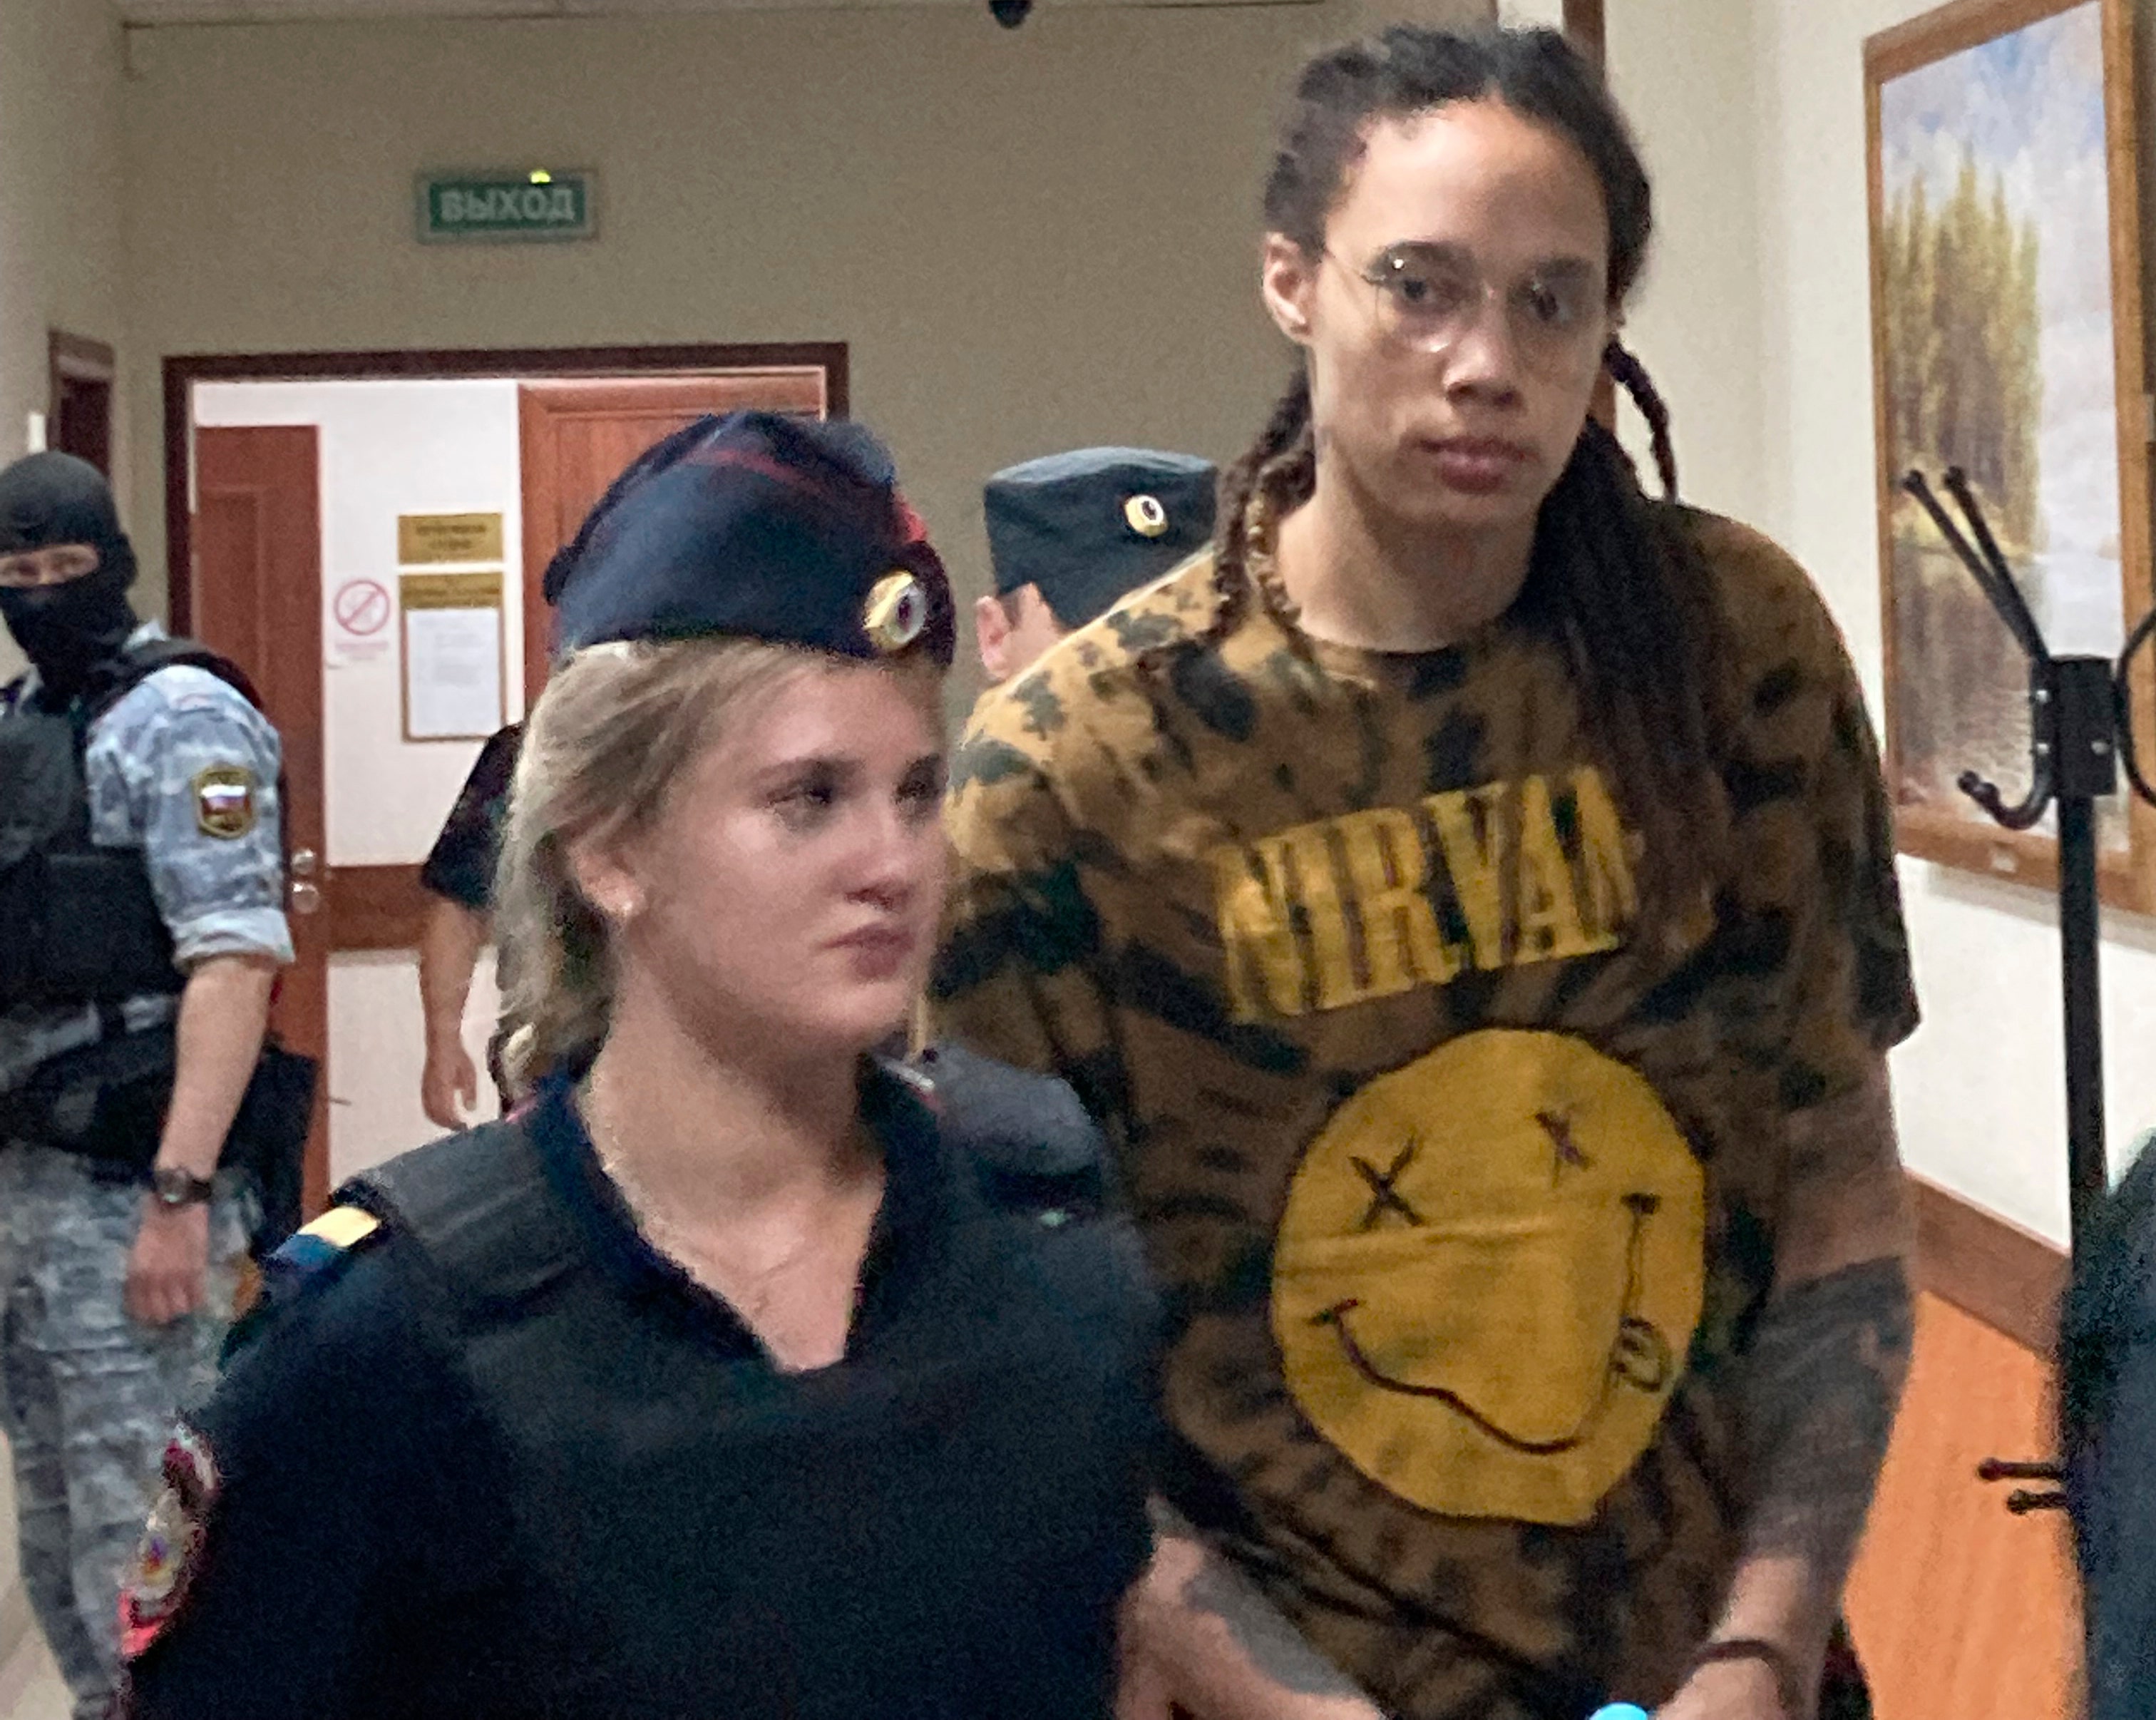 Russian officials say US must respect their laws in Griner case